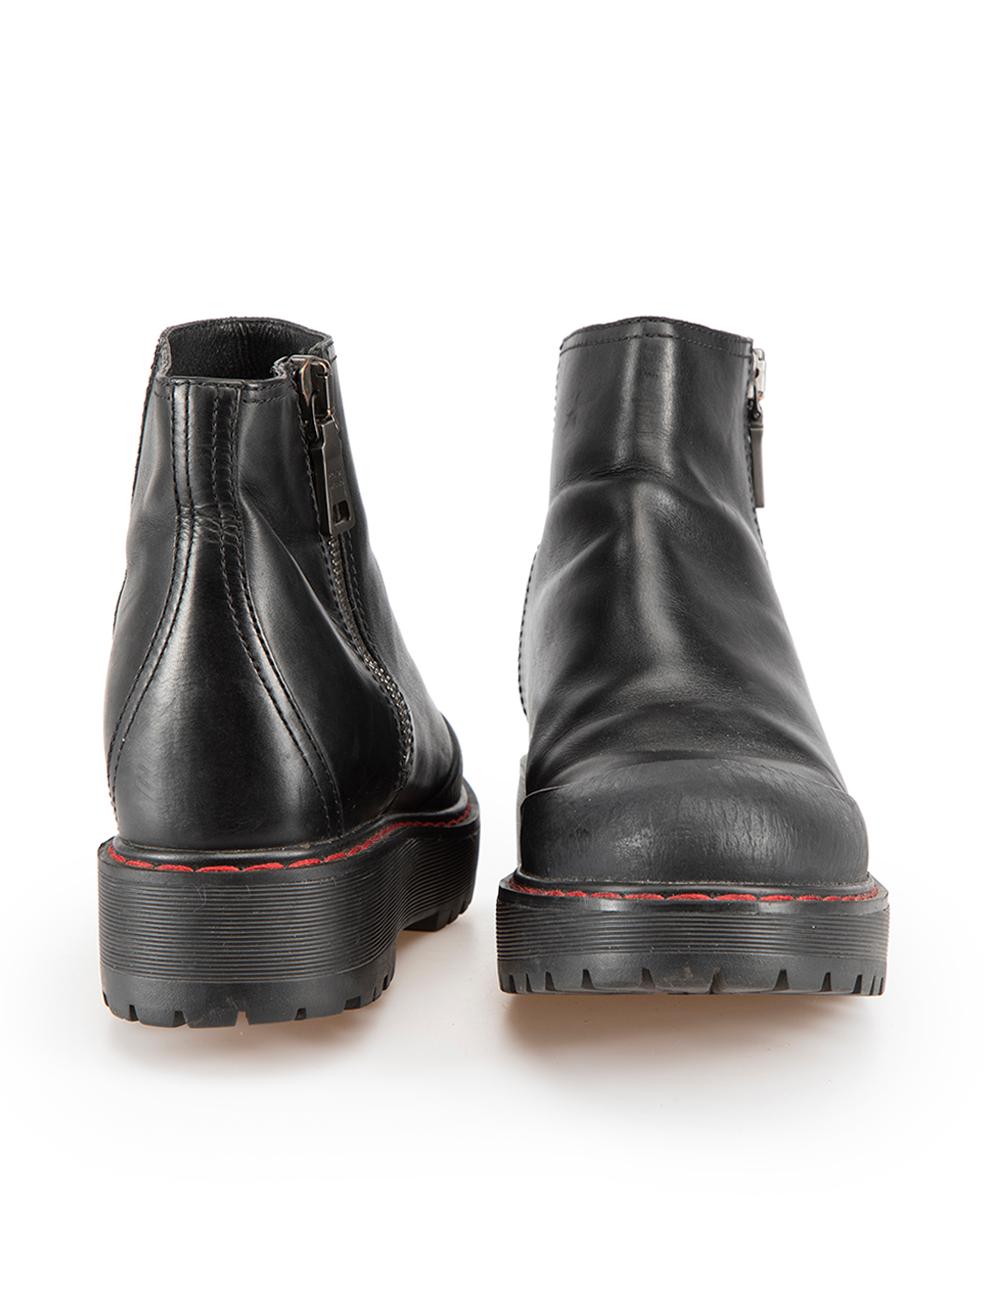 Prada Black Leather Contrast Stitch Chunky Boots Size IT 40 In Excellent Condition For Sale In London, GB